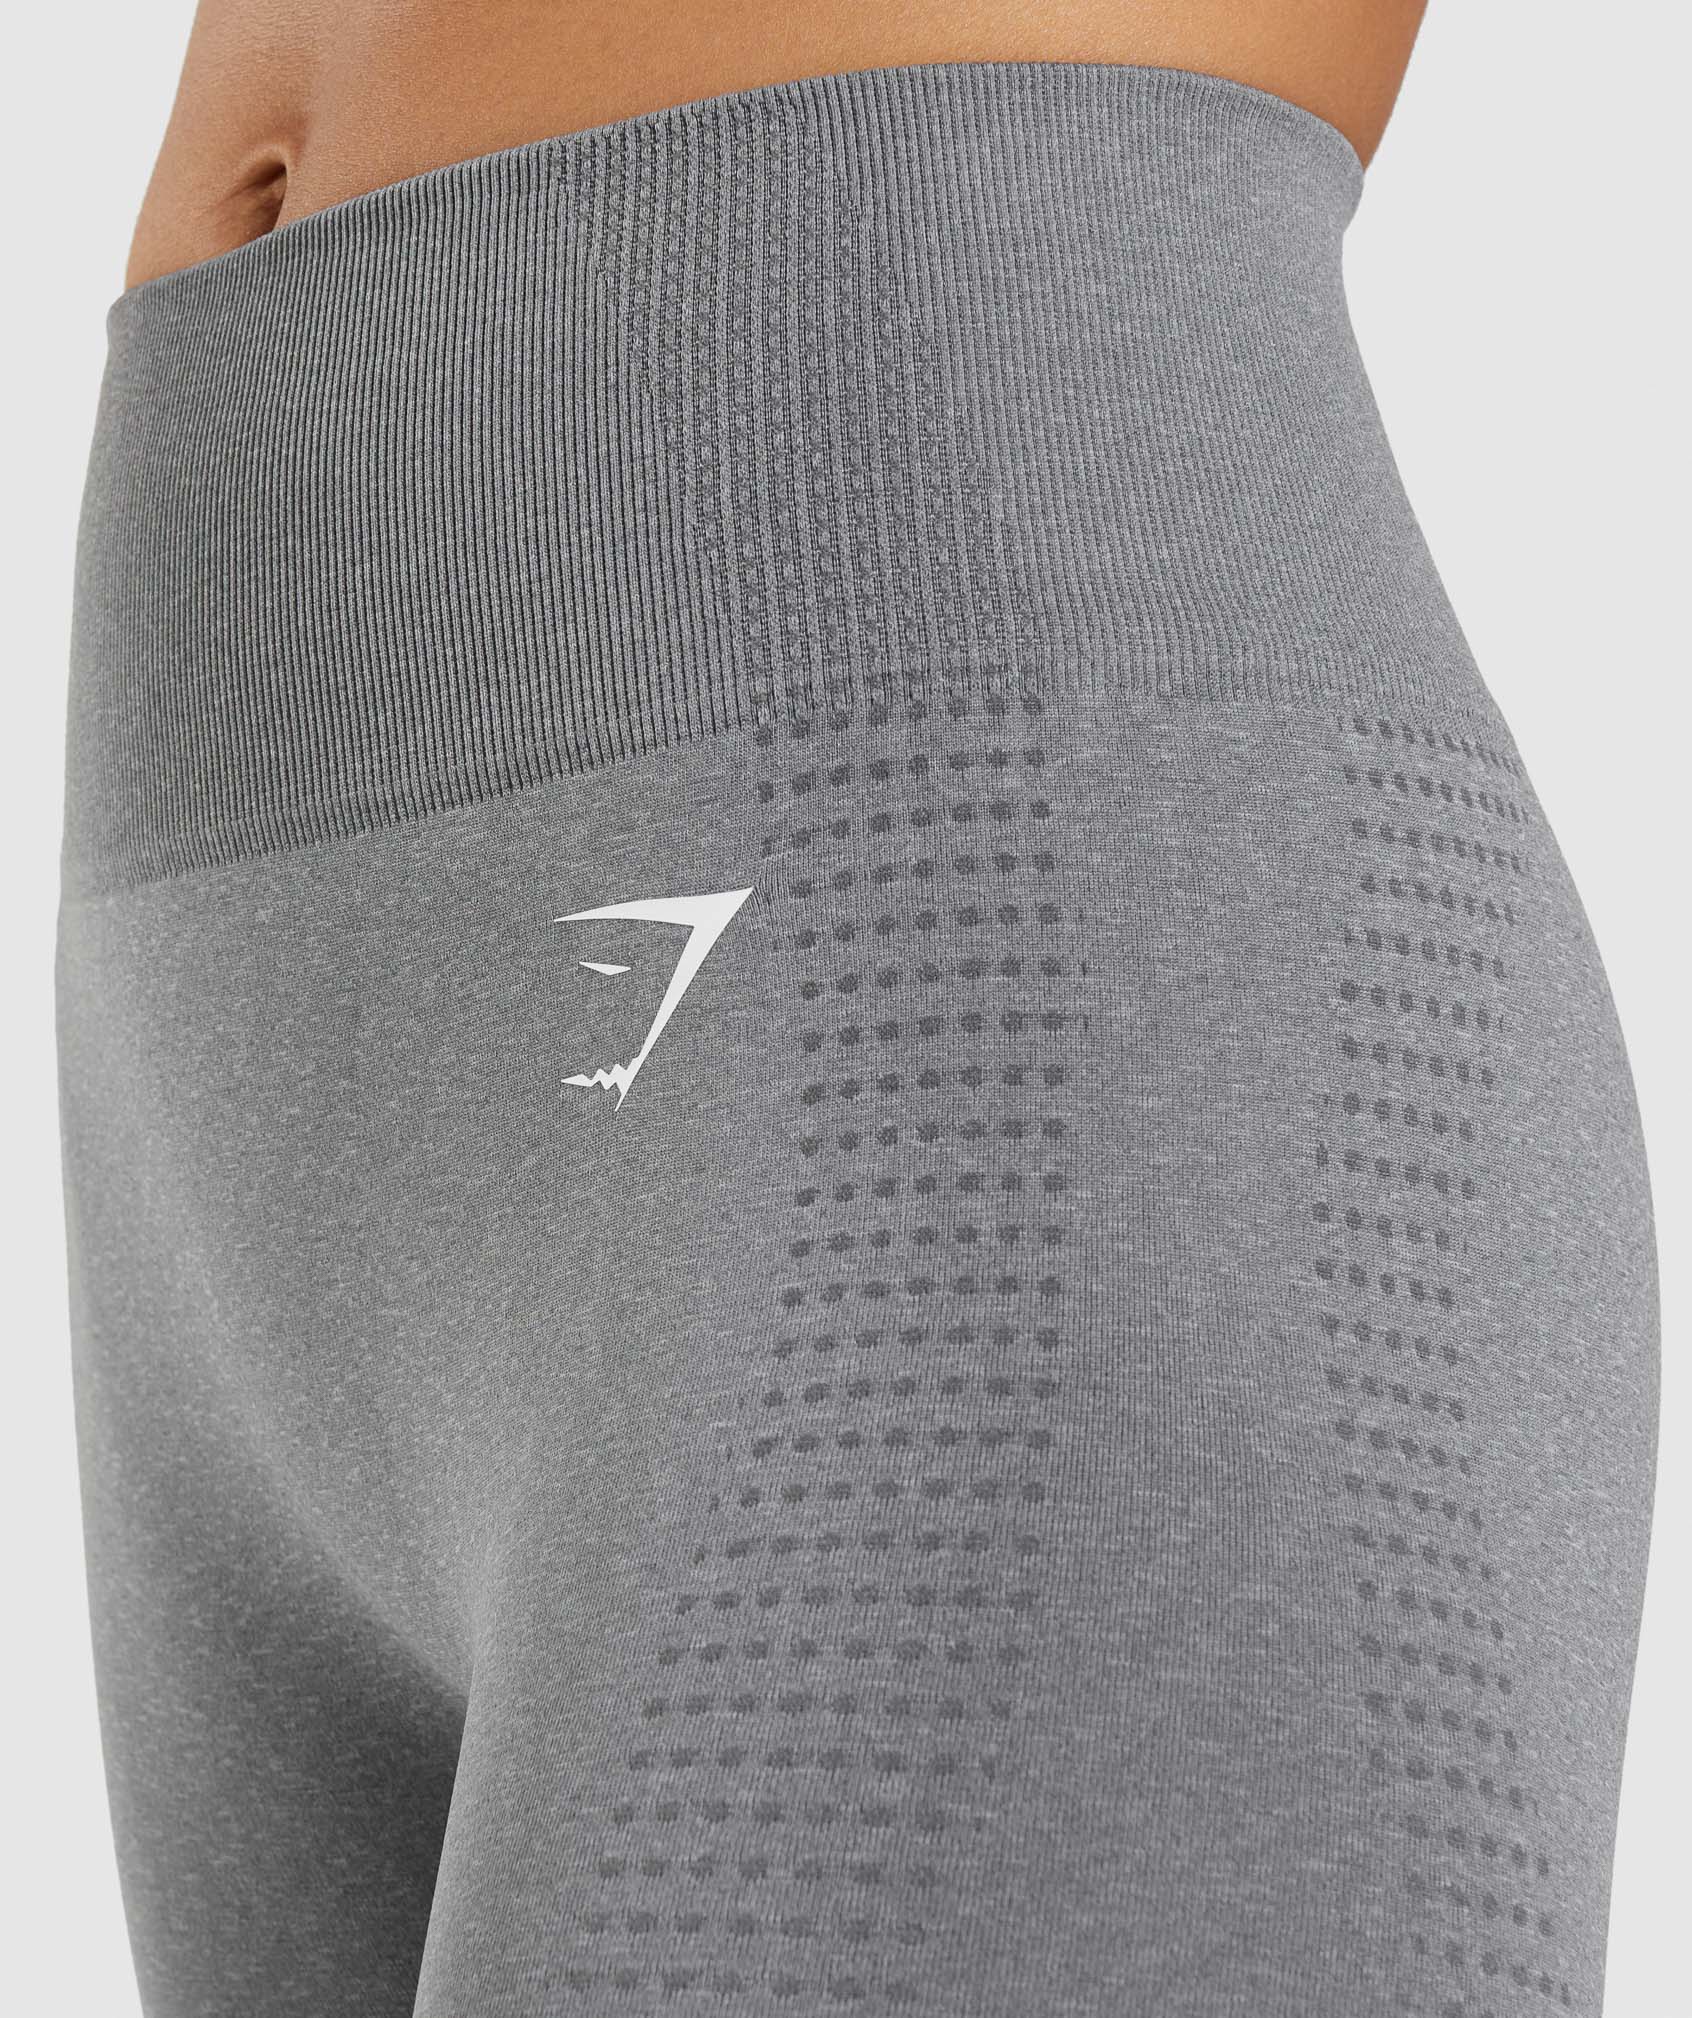 Gymshark Flex Leggings in Smokey Grey Marl/Jade Green Multiple - $40 New  With Tags - From May